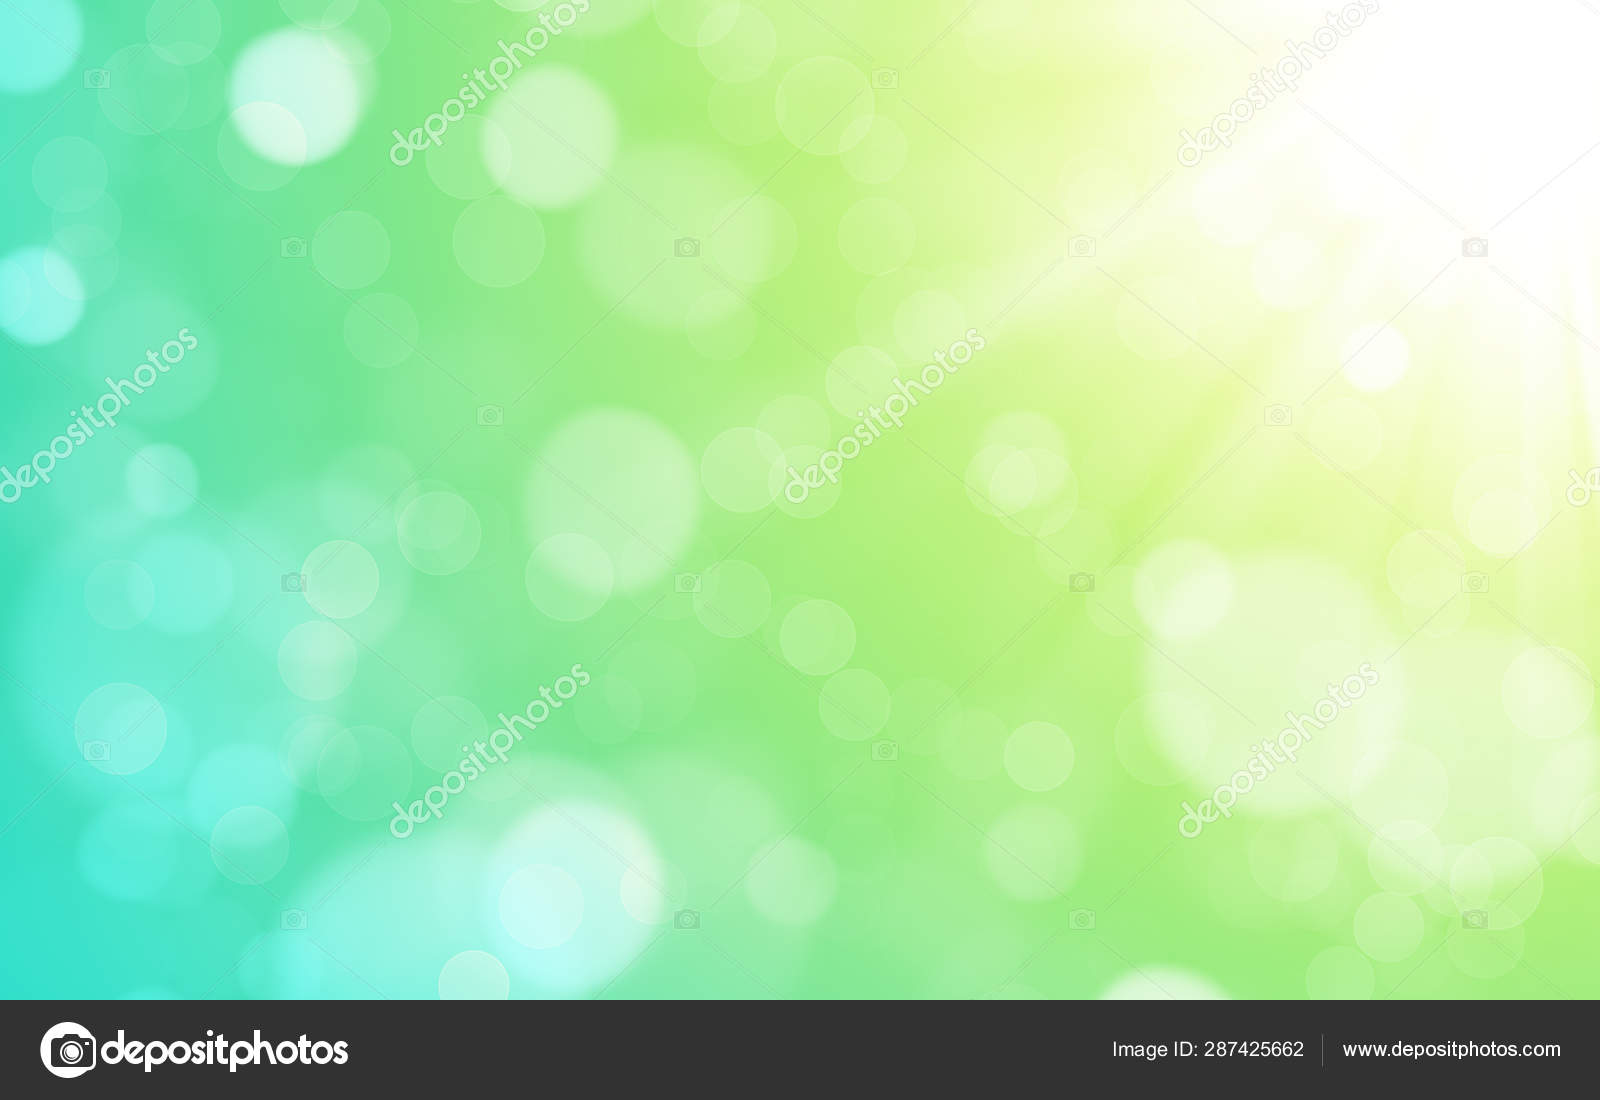 Abstract Colorful Banner Background Stock Photo by ©pixelliebe ...